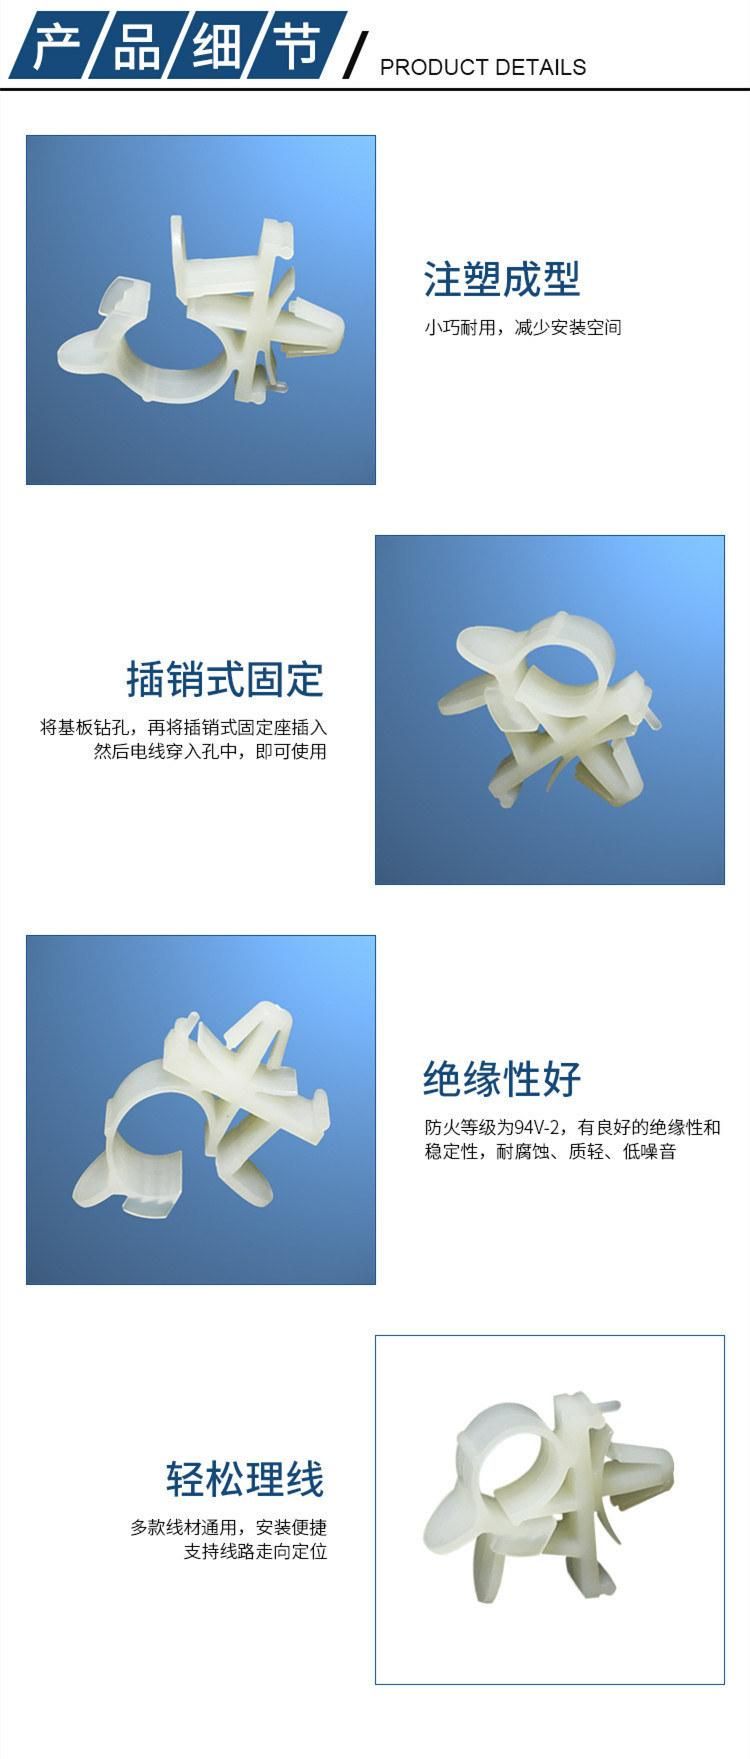 Plastic Cable Fasten Saddle Adjustable Cable Fixing, Heyingcn Factory Supply Insulation Nylon Wire Clip